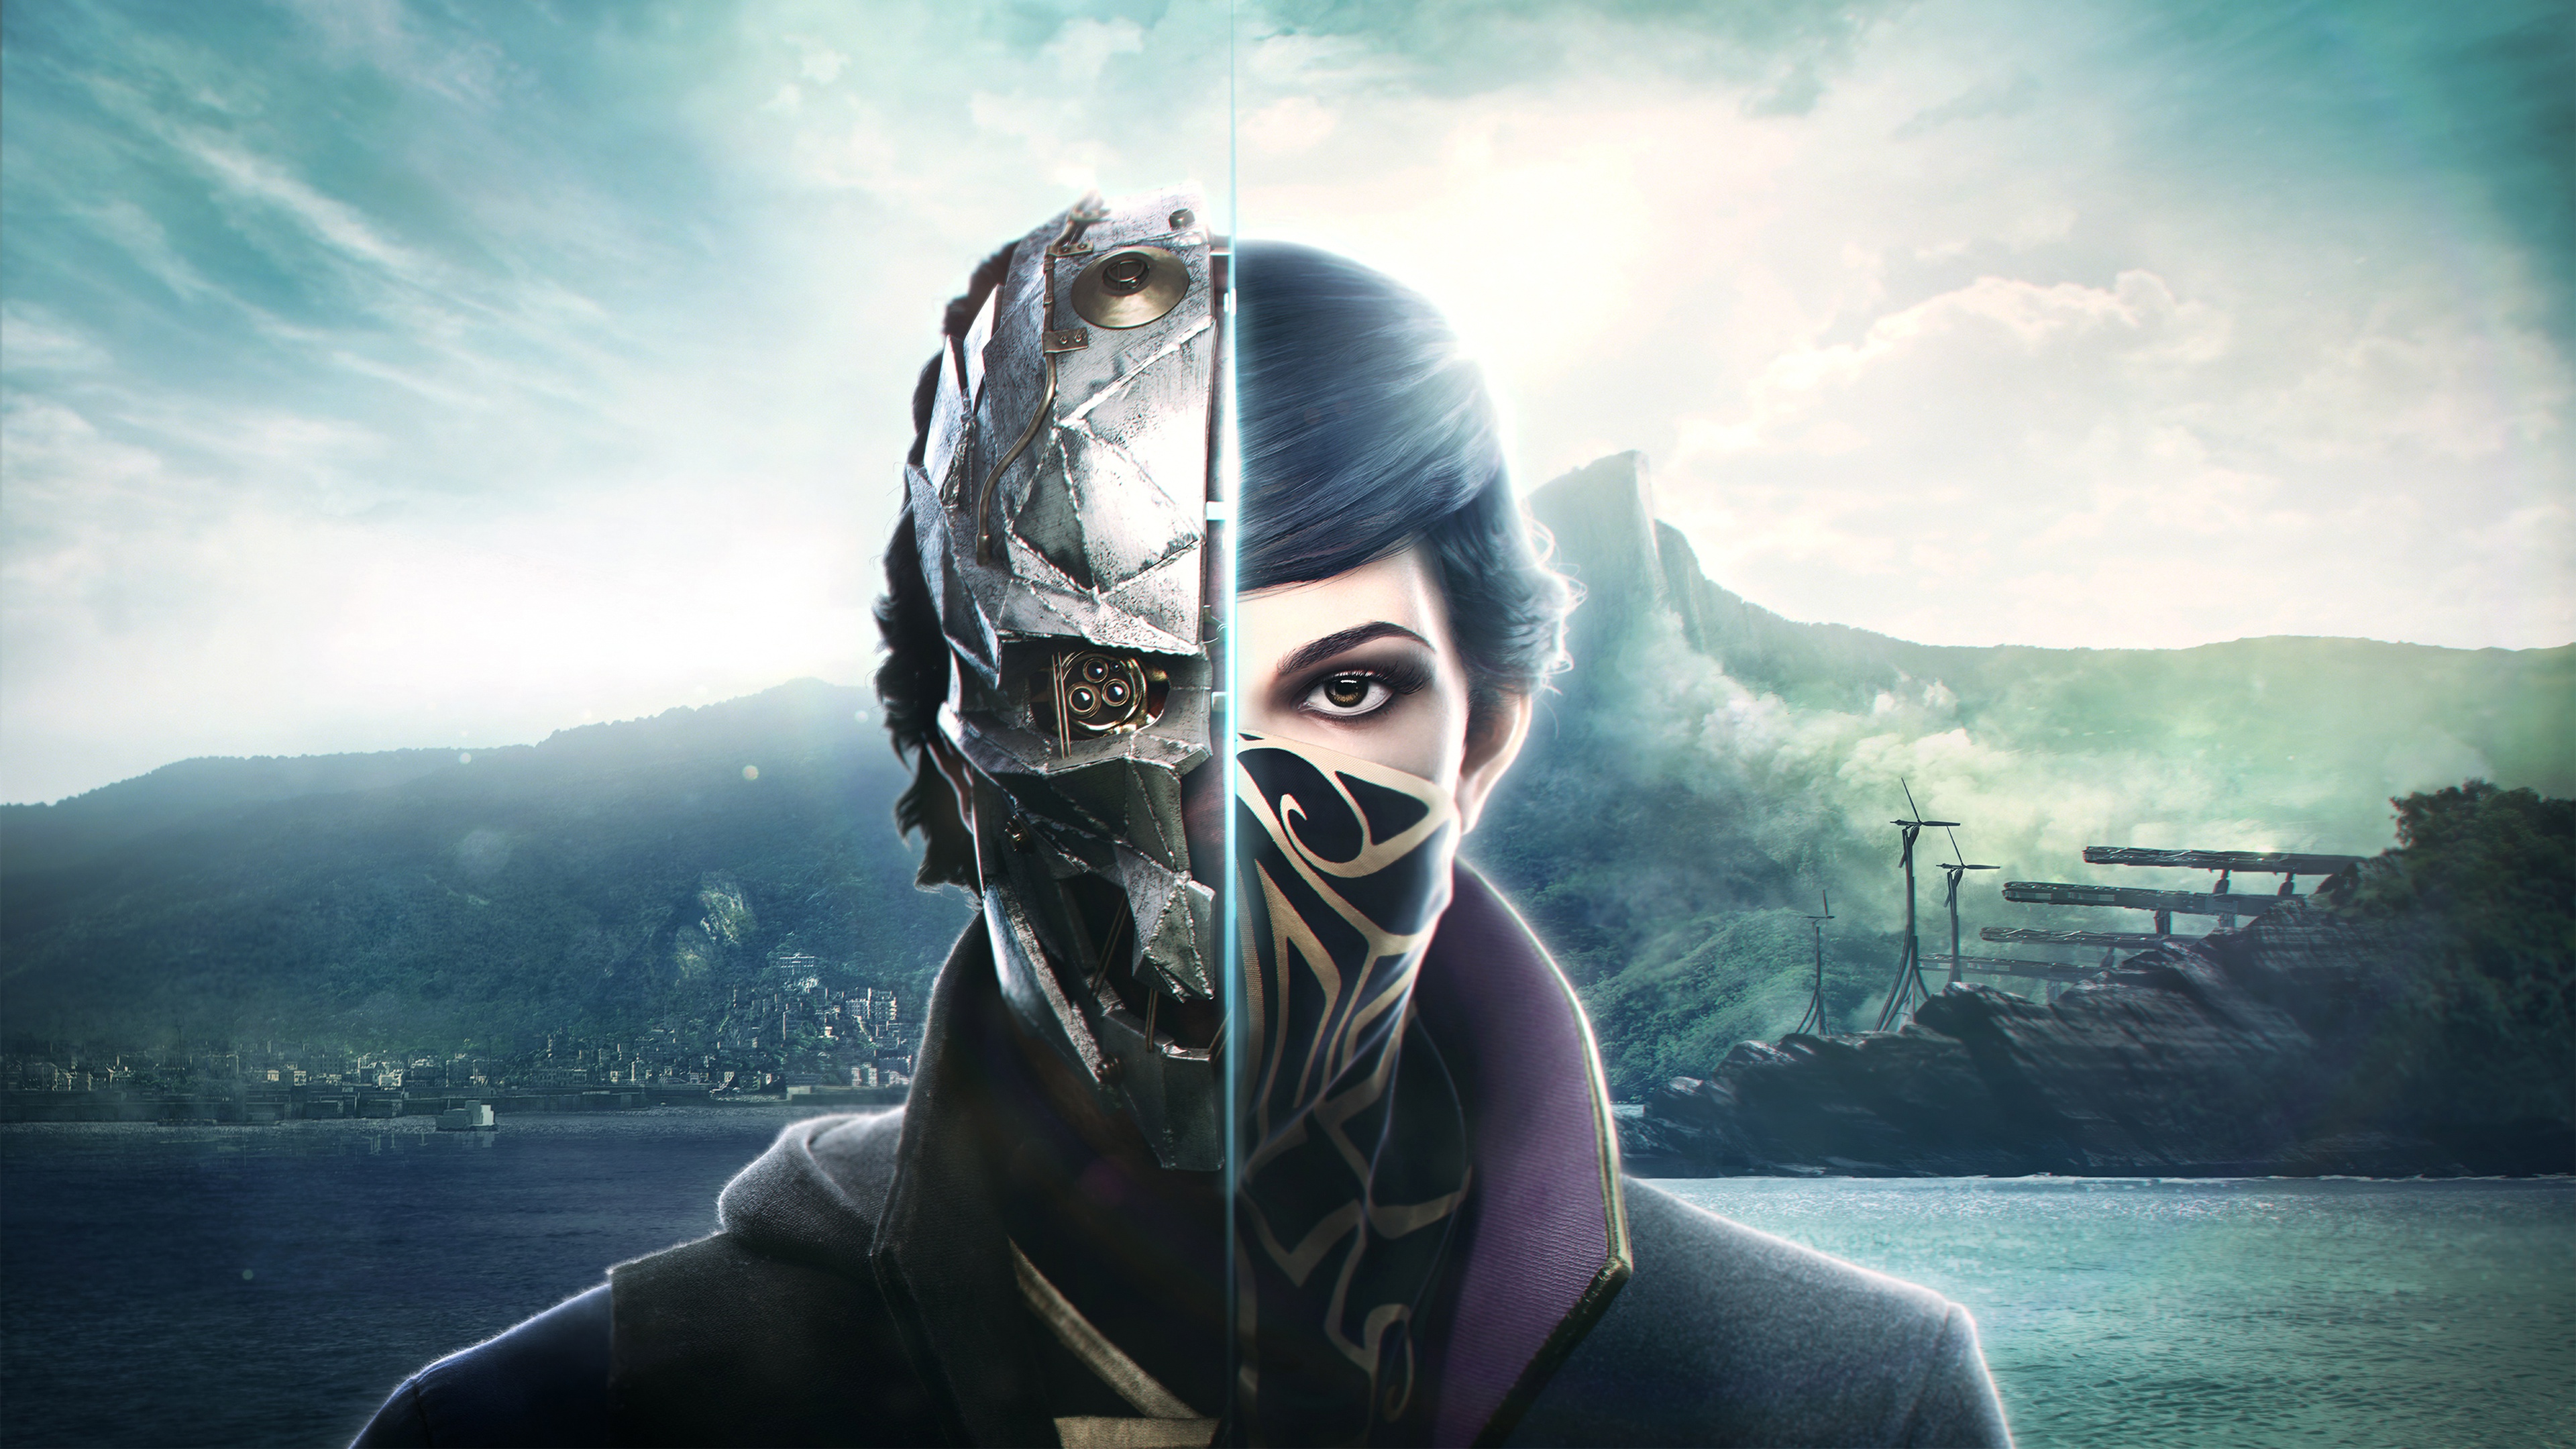 Dishonored 4k Ultra HD Wallpaper Background Image